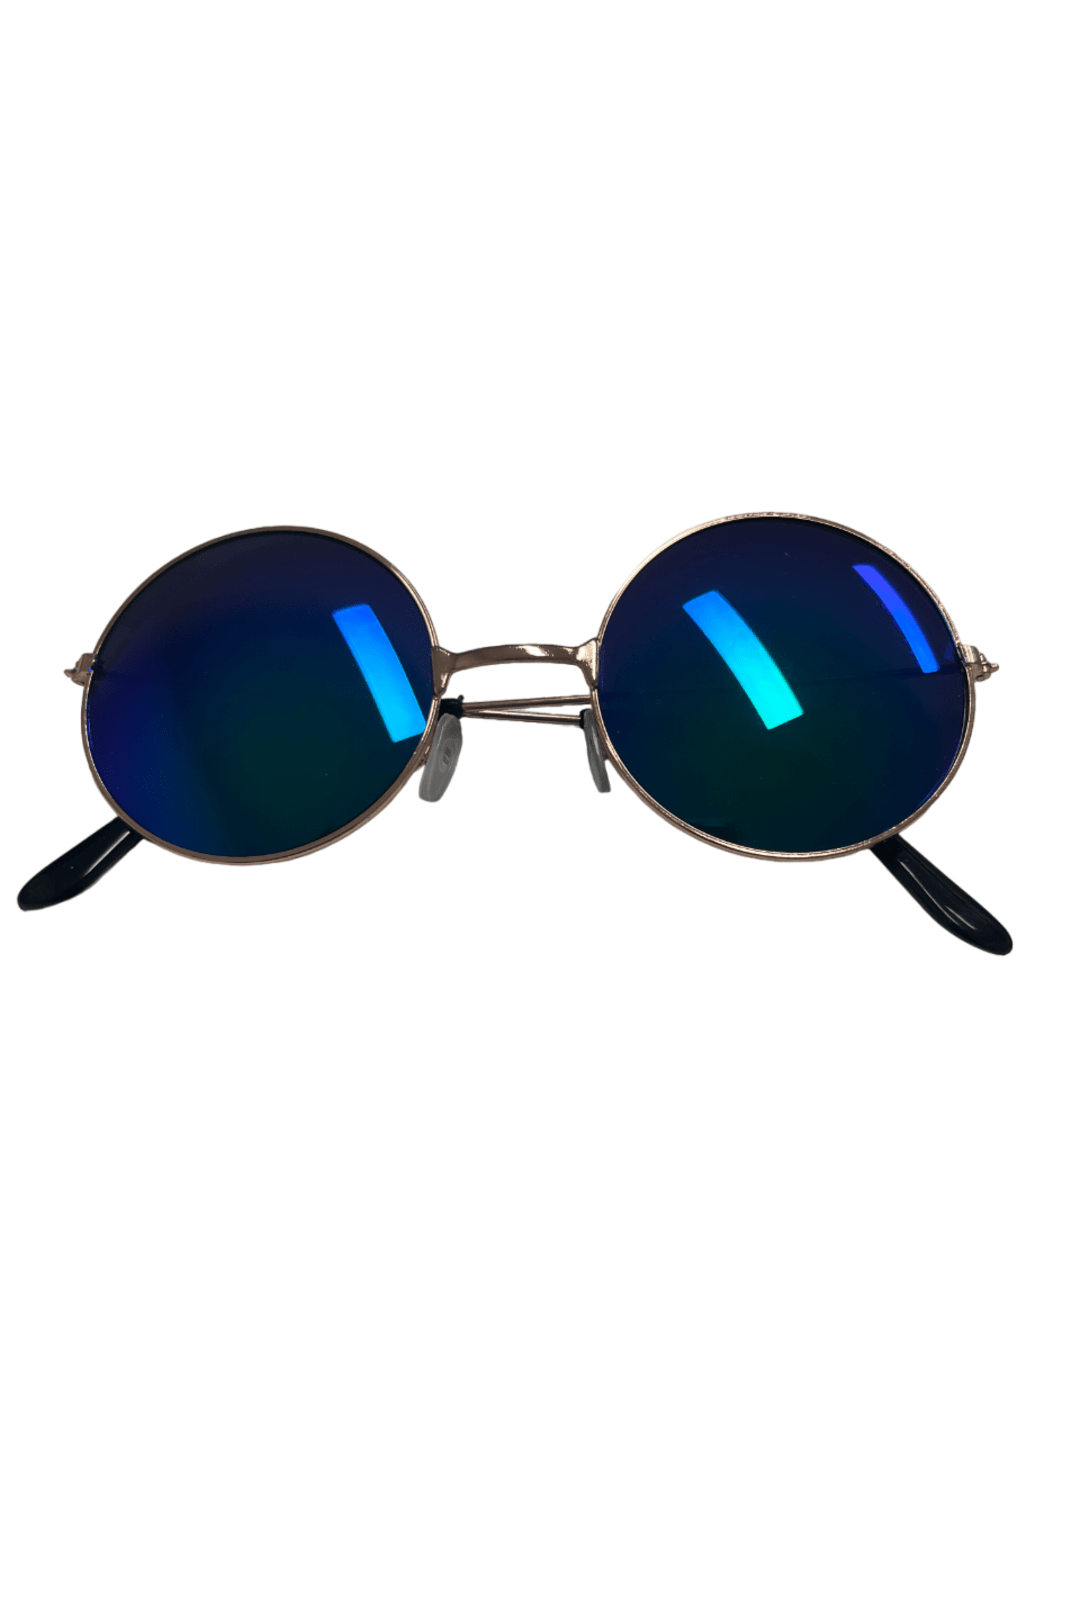 Green & Blue Reflective Round Glasses